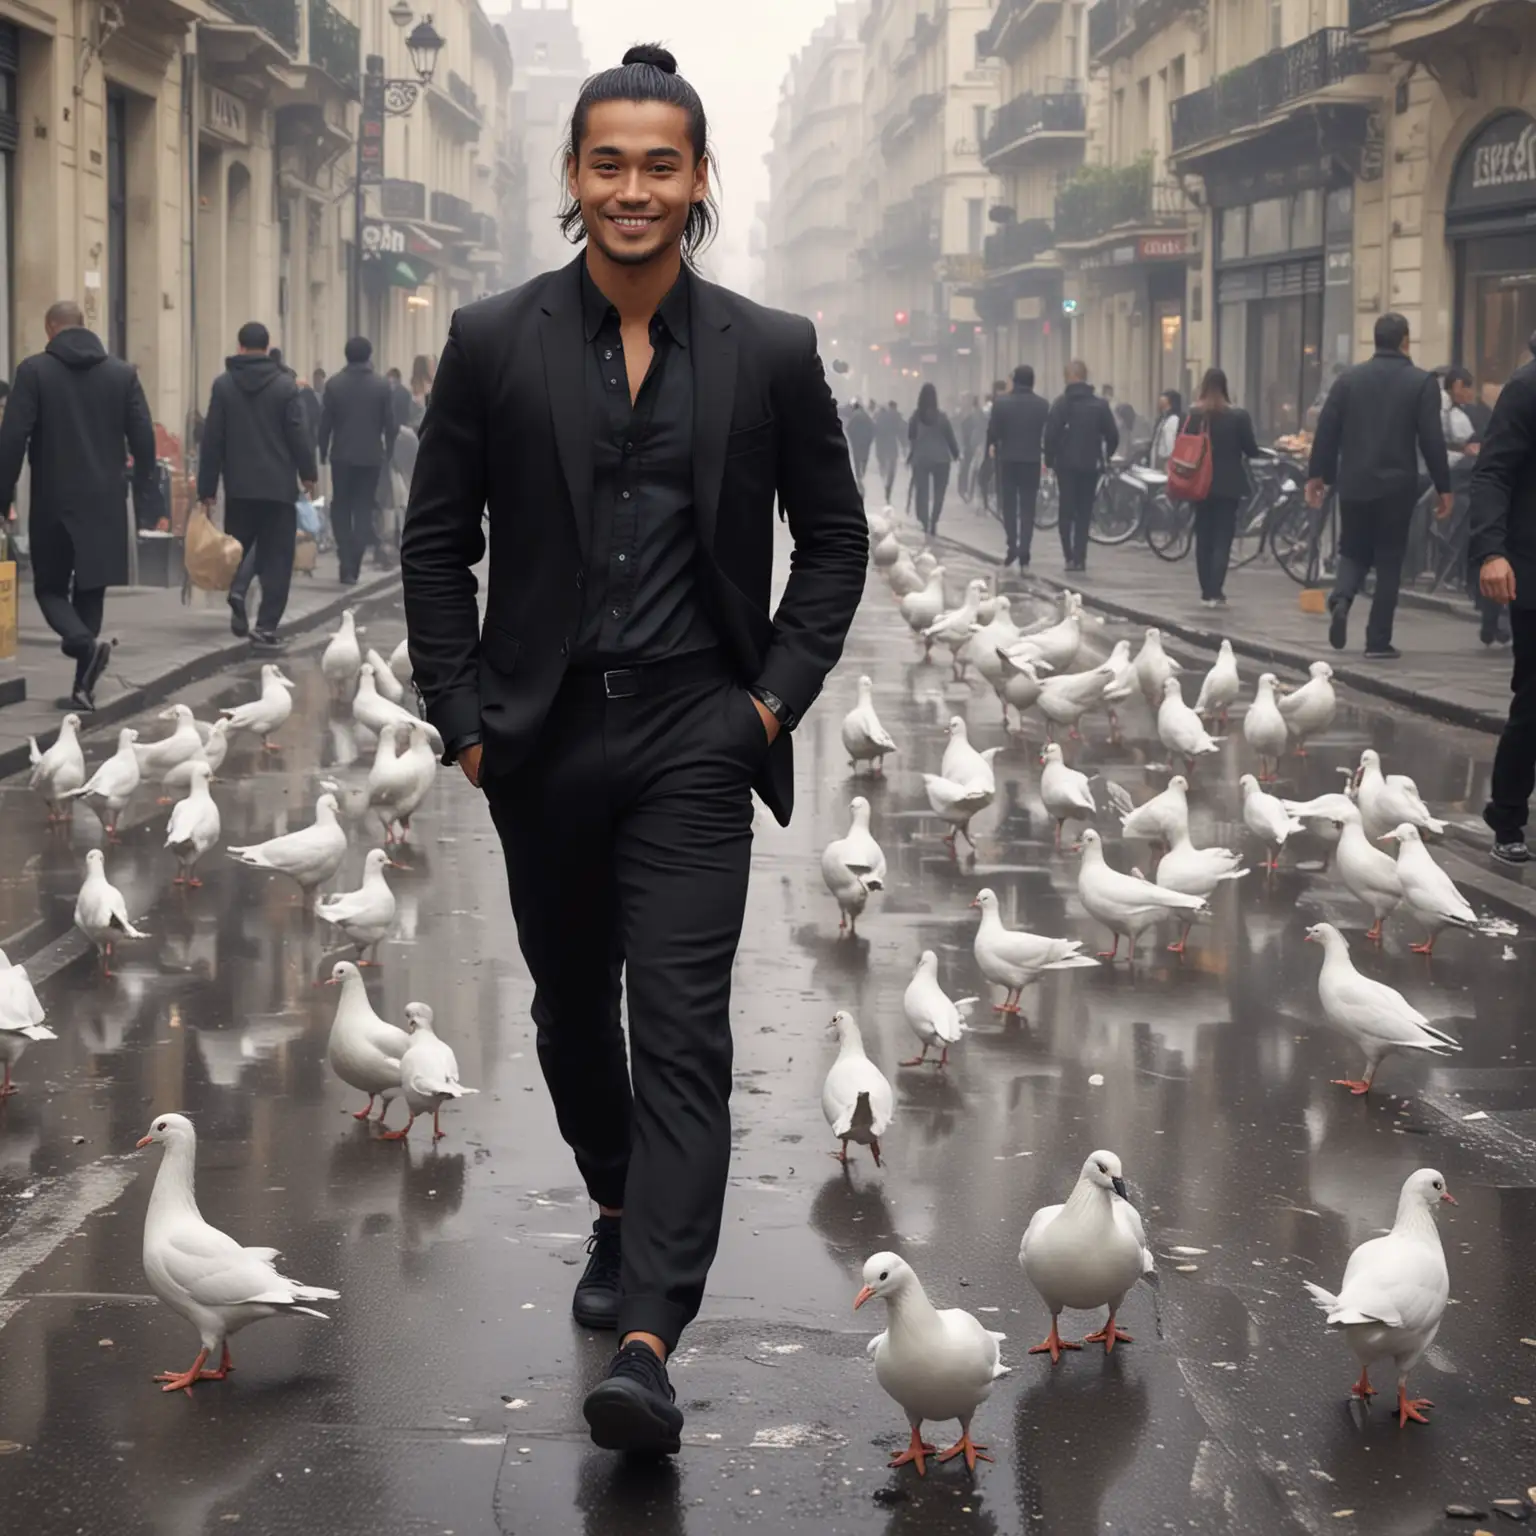 Athletic-Indonesian-Man-in-Paris-Morning-Scene-with-Pigeons